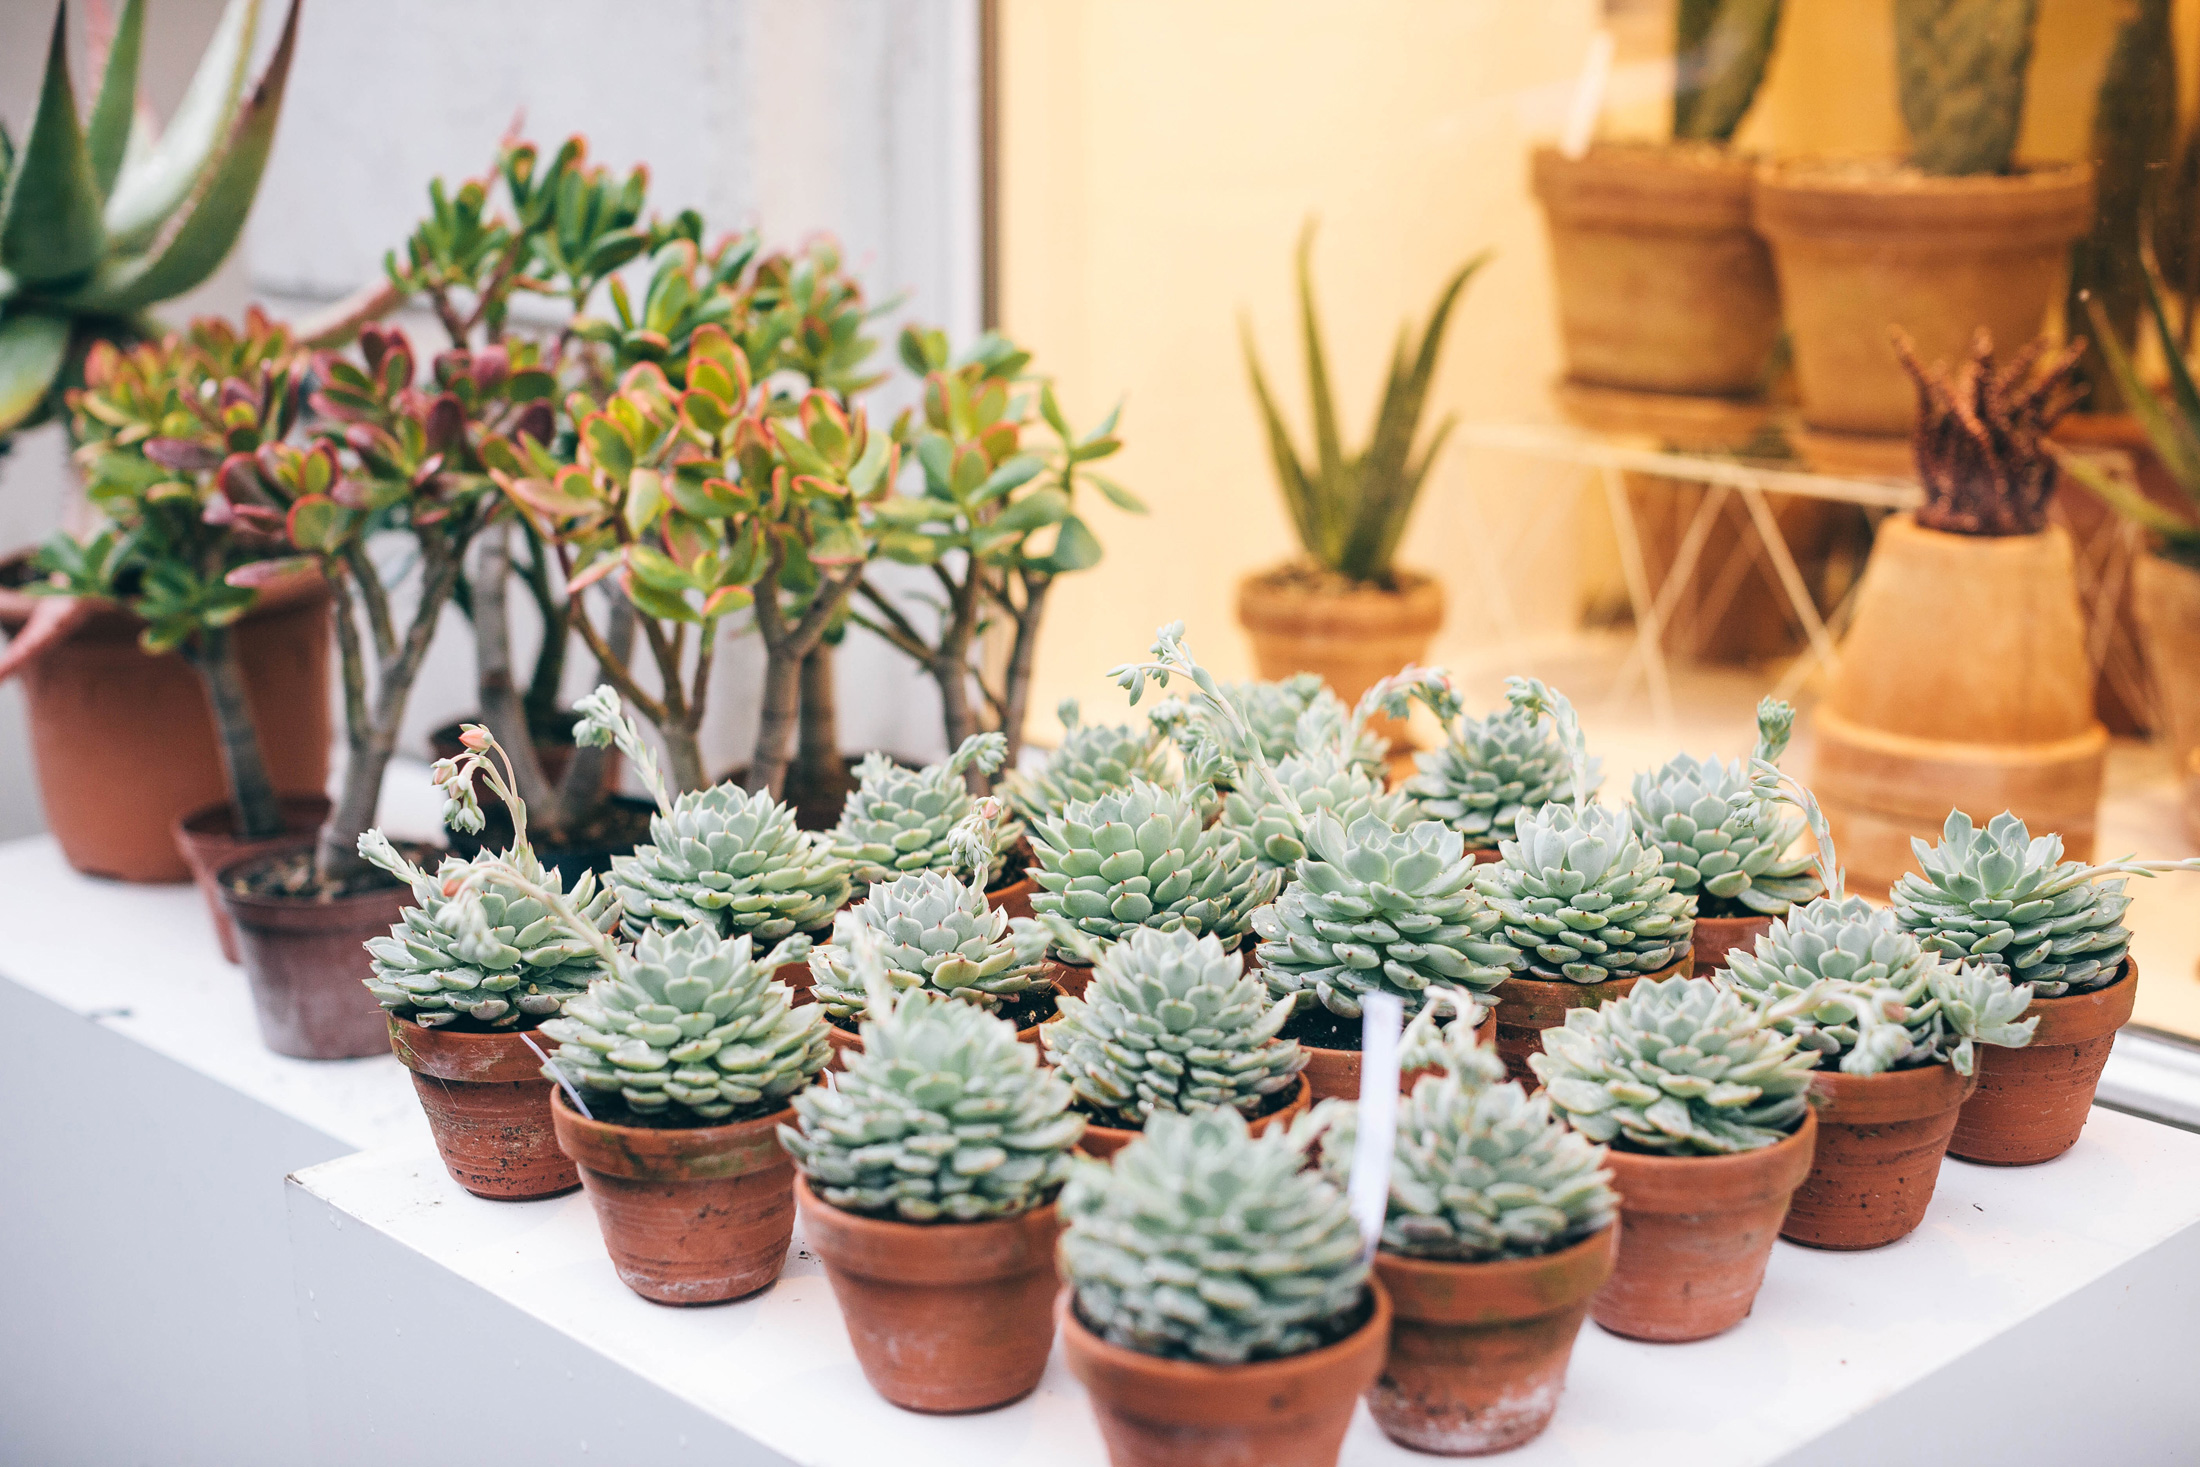 Kaktus Købenvahn is a newly opened boutique dedicated to selling cacti and succulents